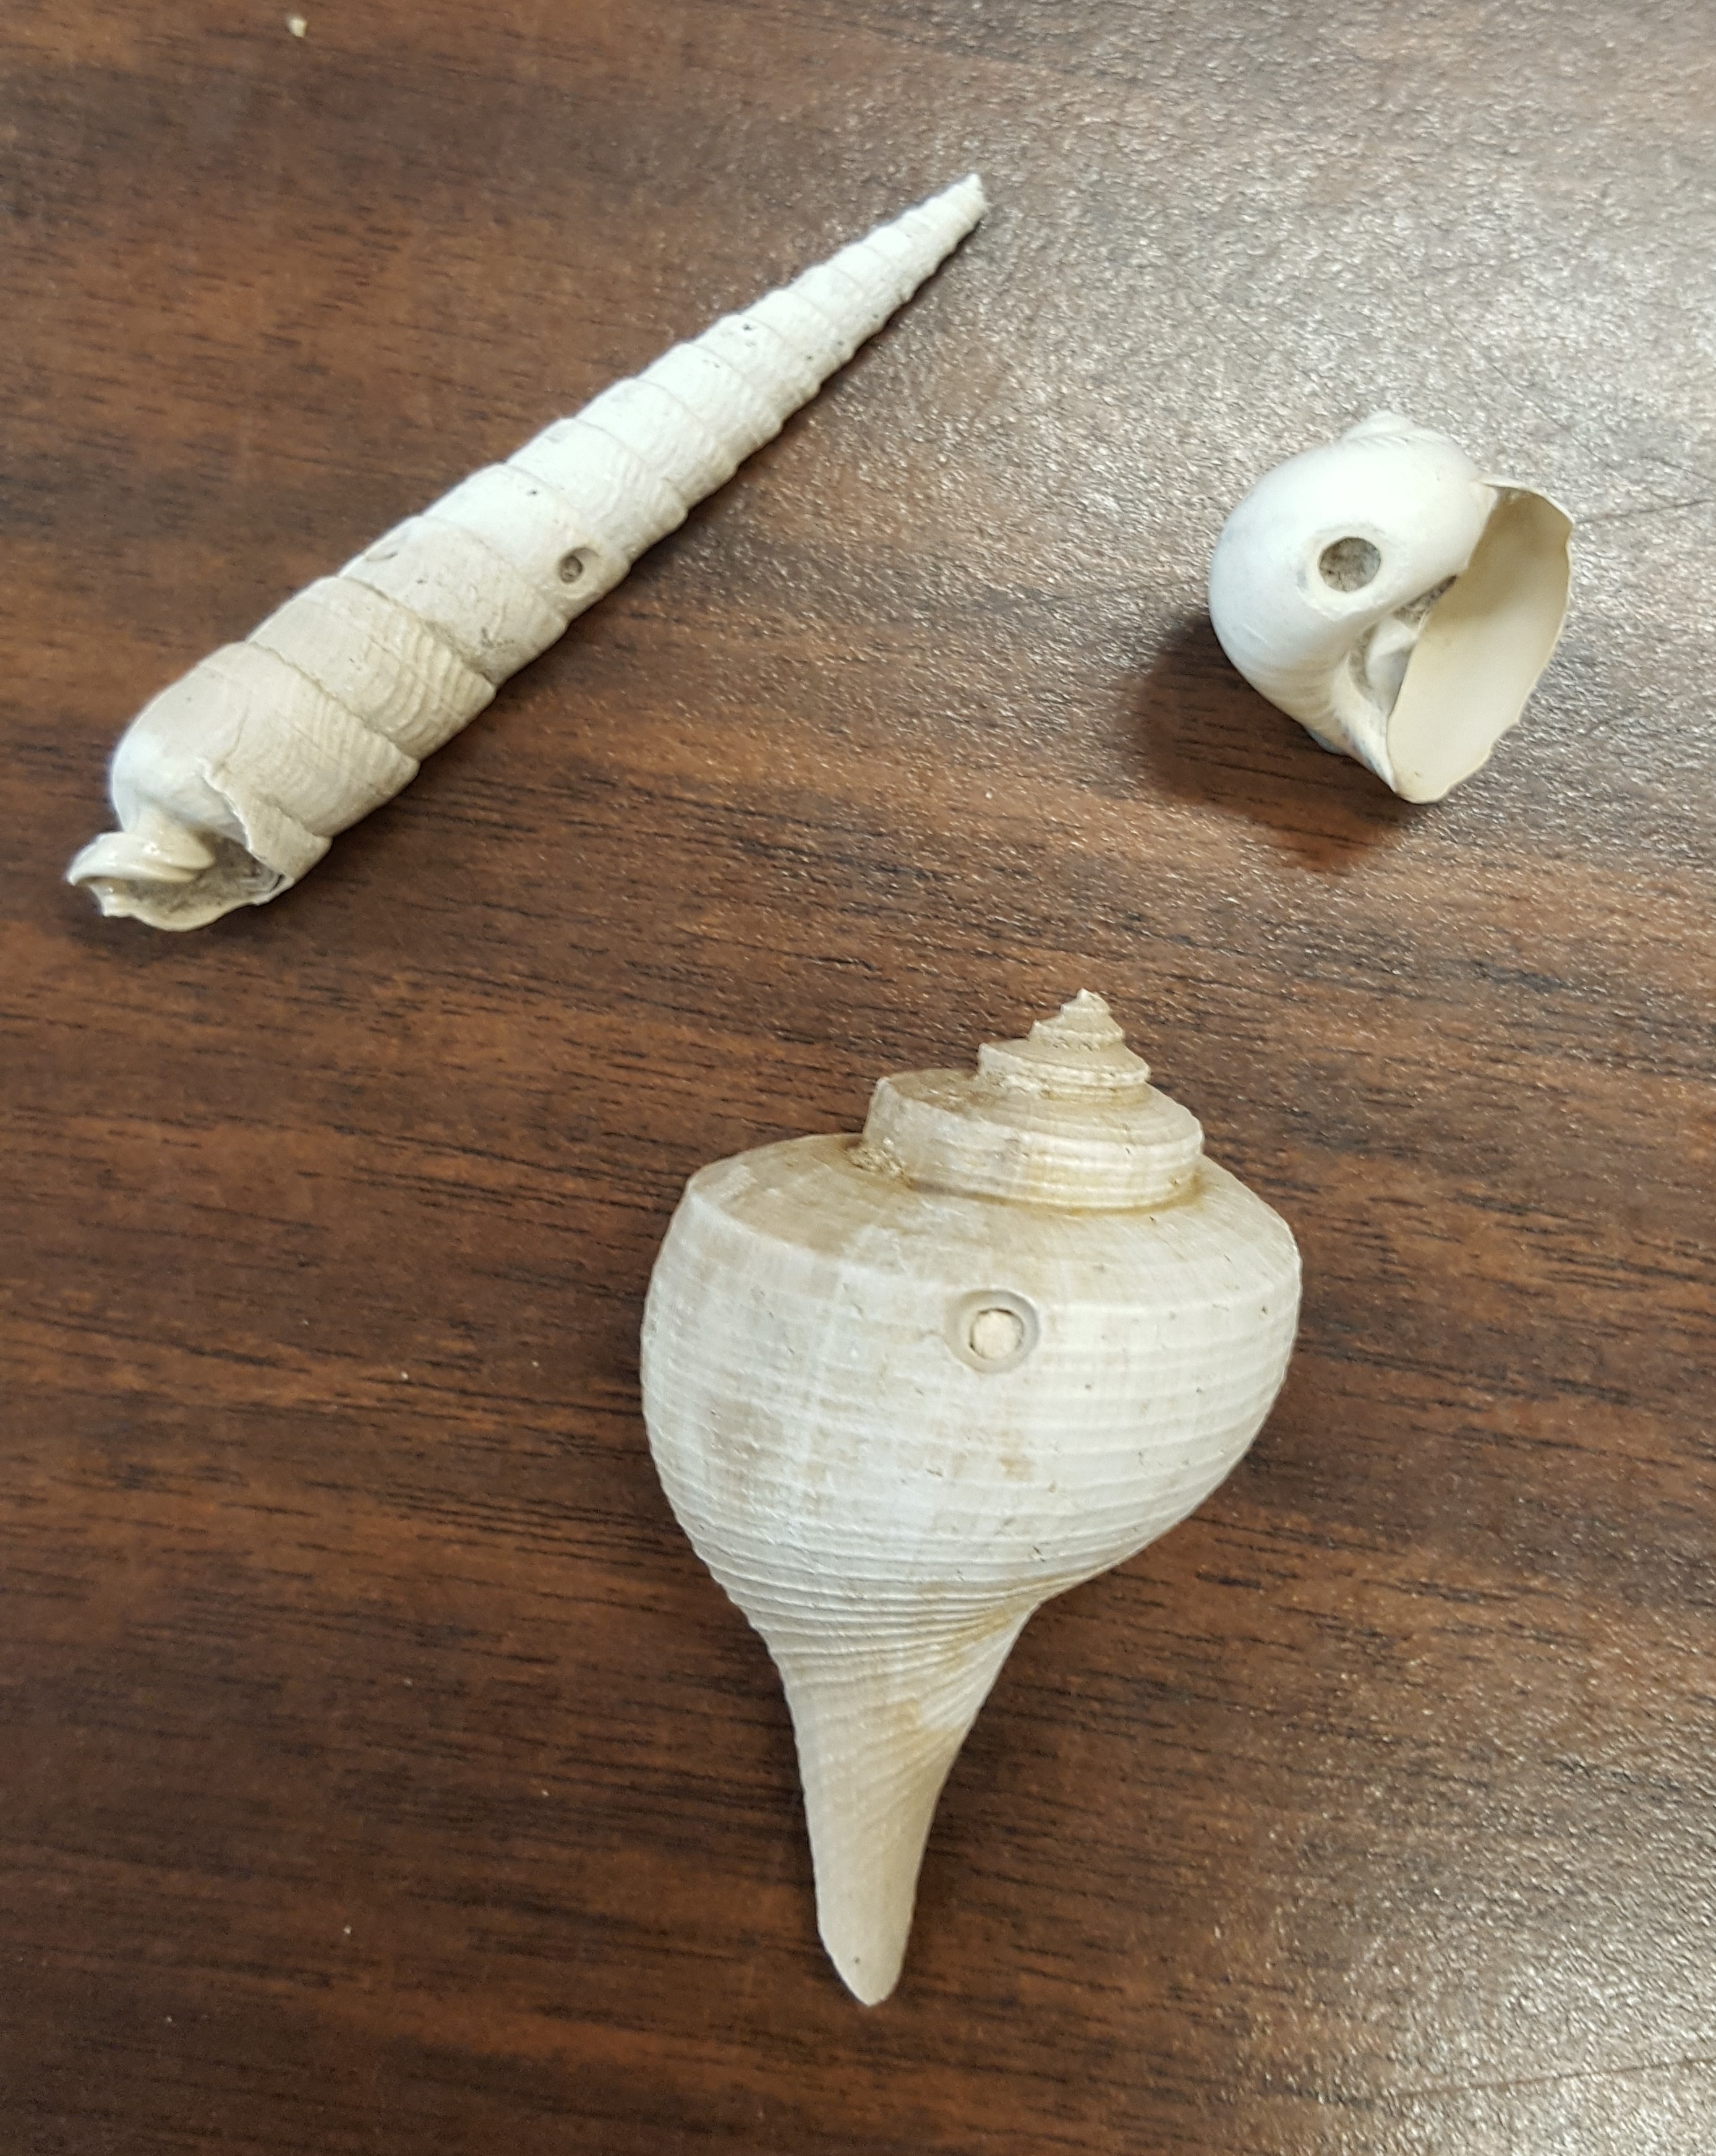 Three different species of gastropod all with beveled drill holds from a shell drilling snail predator.